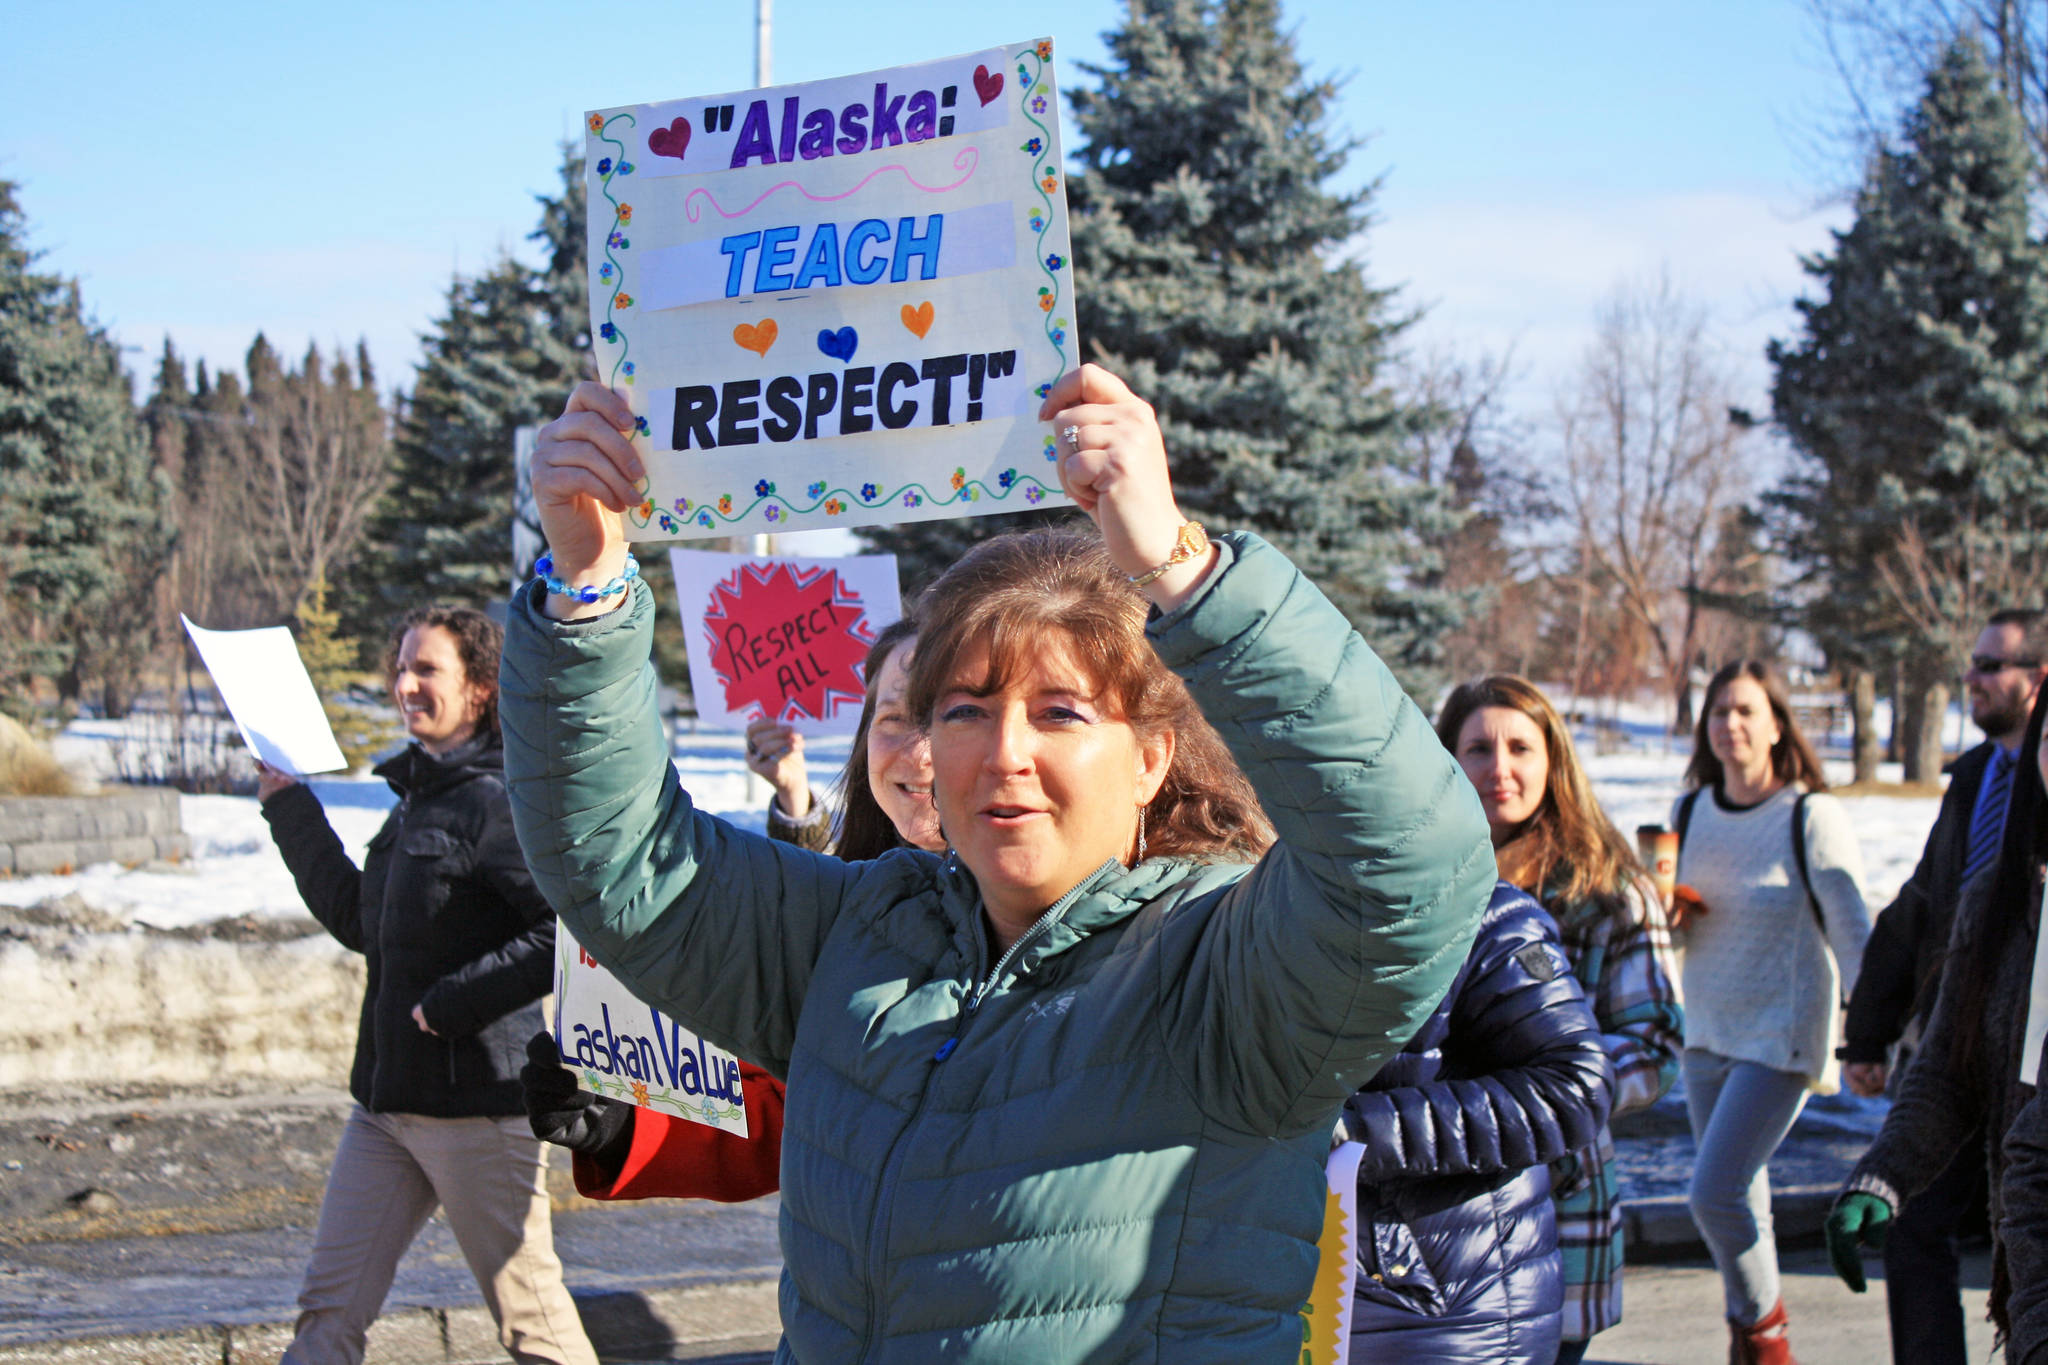 Marchers participate in the Alaskans Choose Respect Awareness Event, hosted by the LeeShore Center, on Wednesday, March 28 in Kenai. The march aimed to draw attention to the issue of sexual assault and domestic violence. (Photo by Erin Thompson/Peninsula Clarion)